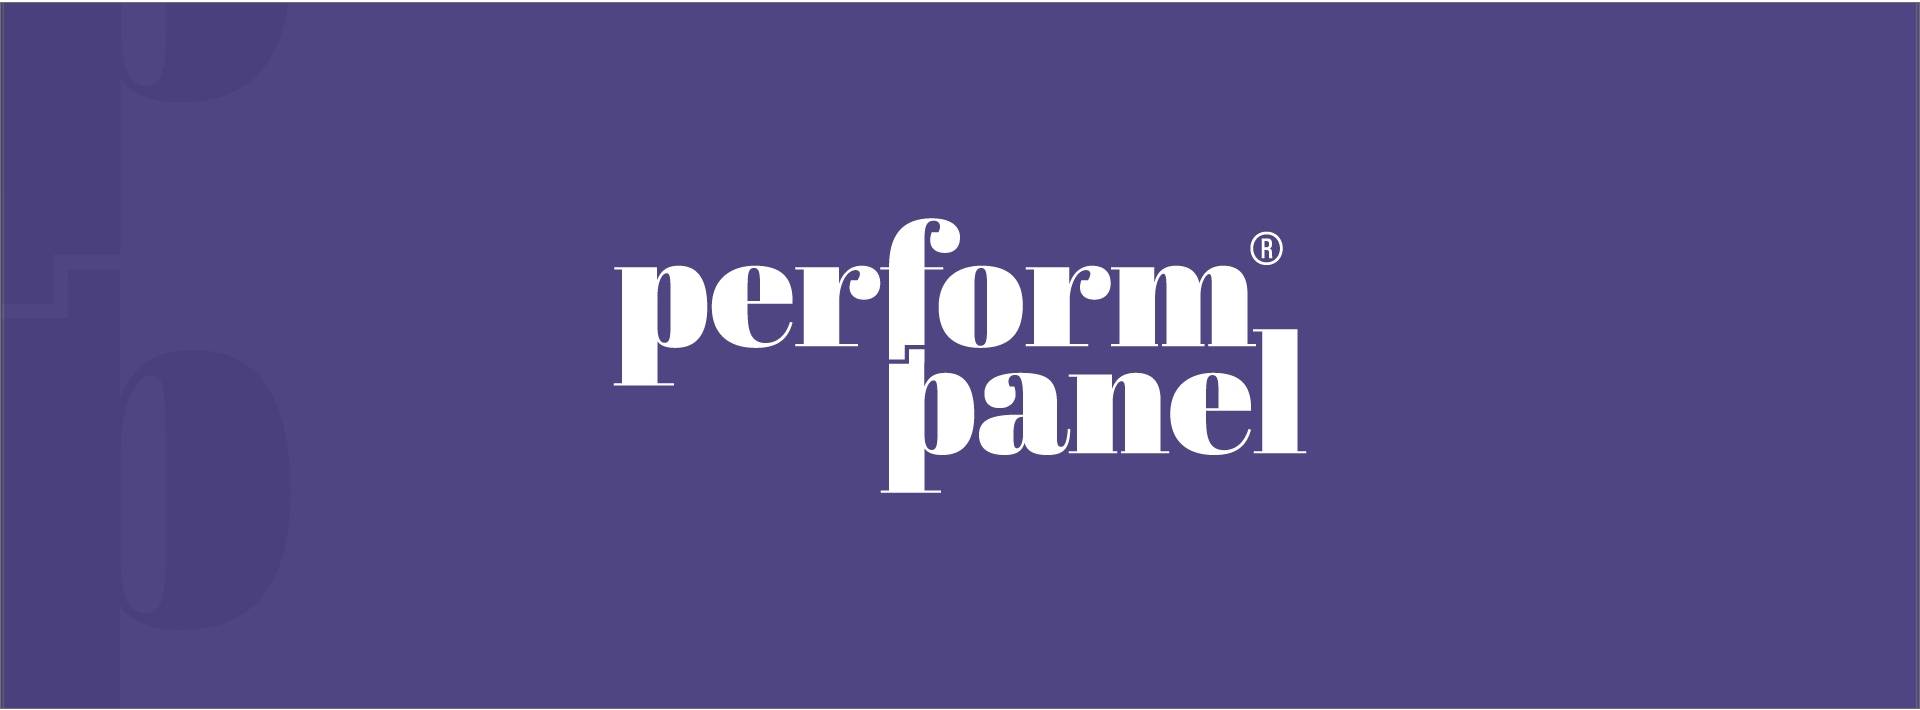 Perform Panel white logo on a purple background